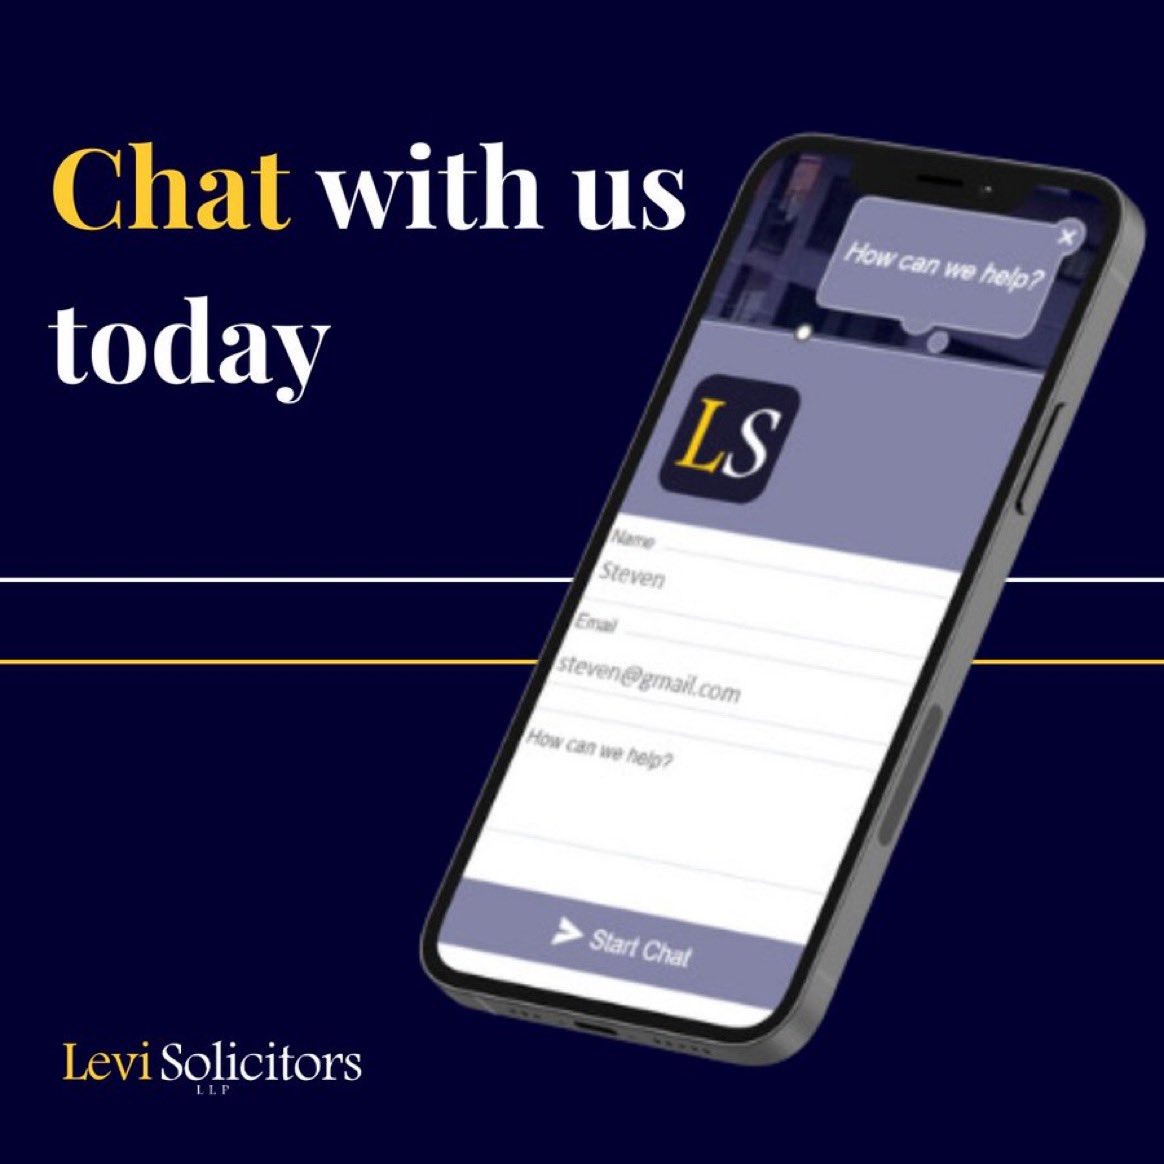 We are always working on ways to make life easier for our clients. We have now introduced a live chat function on our website, so you can chat with us online!

If you have a question about a #personalinjury #seriousinjury or #medicalnegligence claim, just  #AskLevi #heretohelp